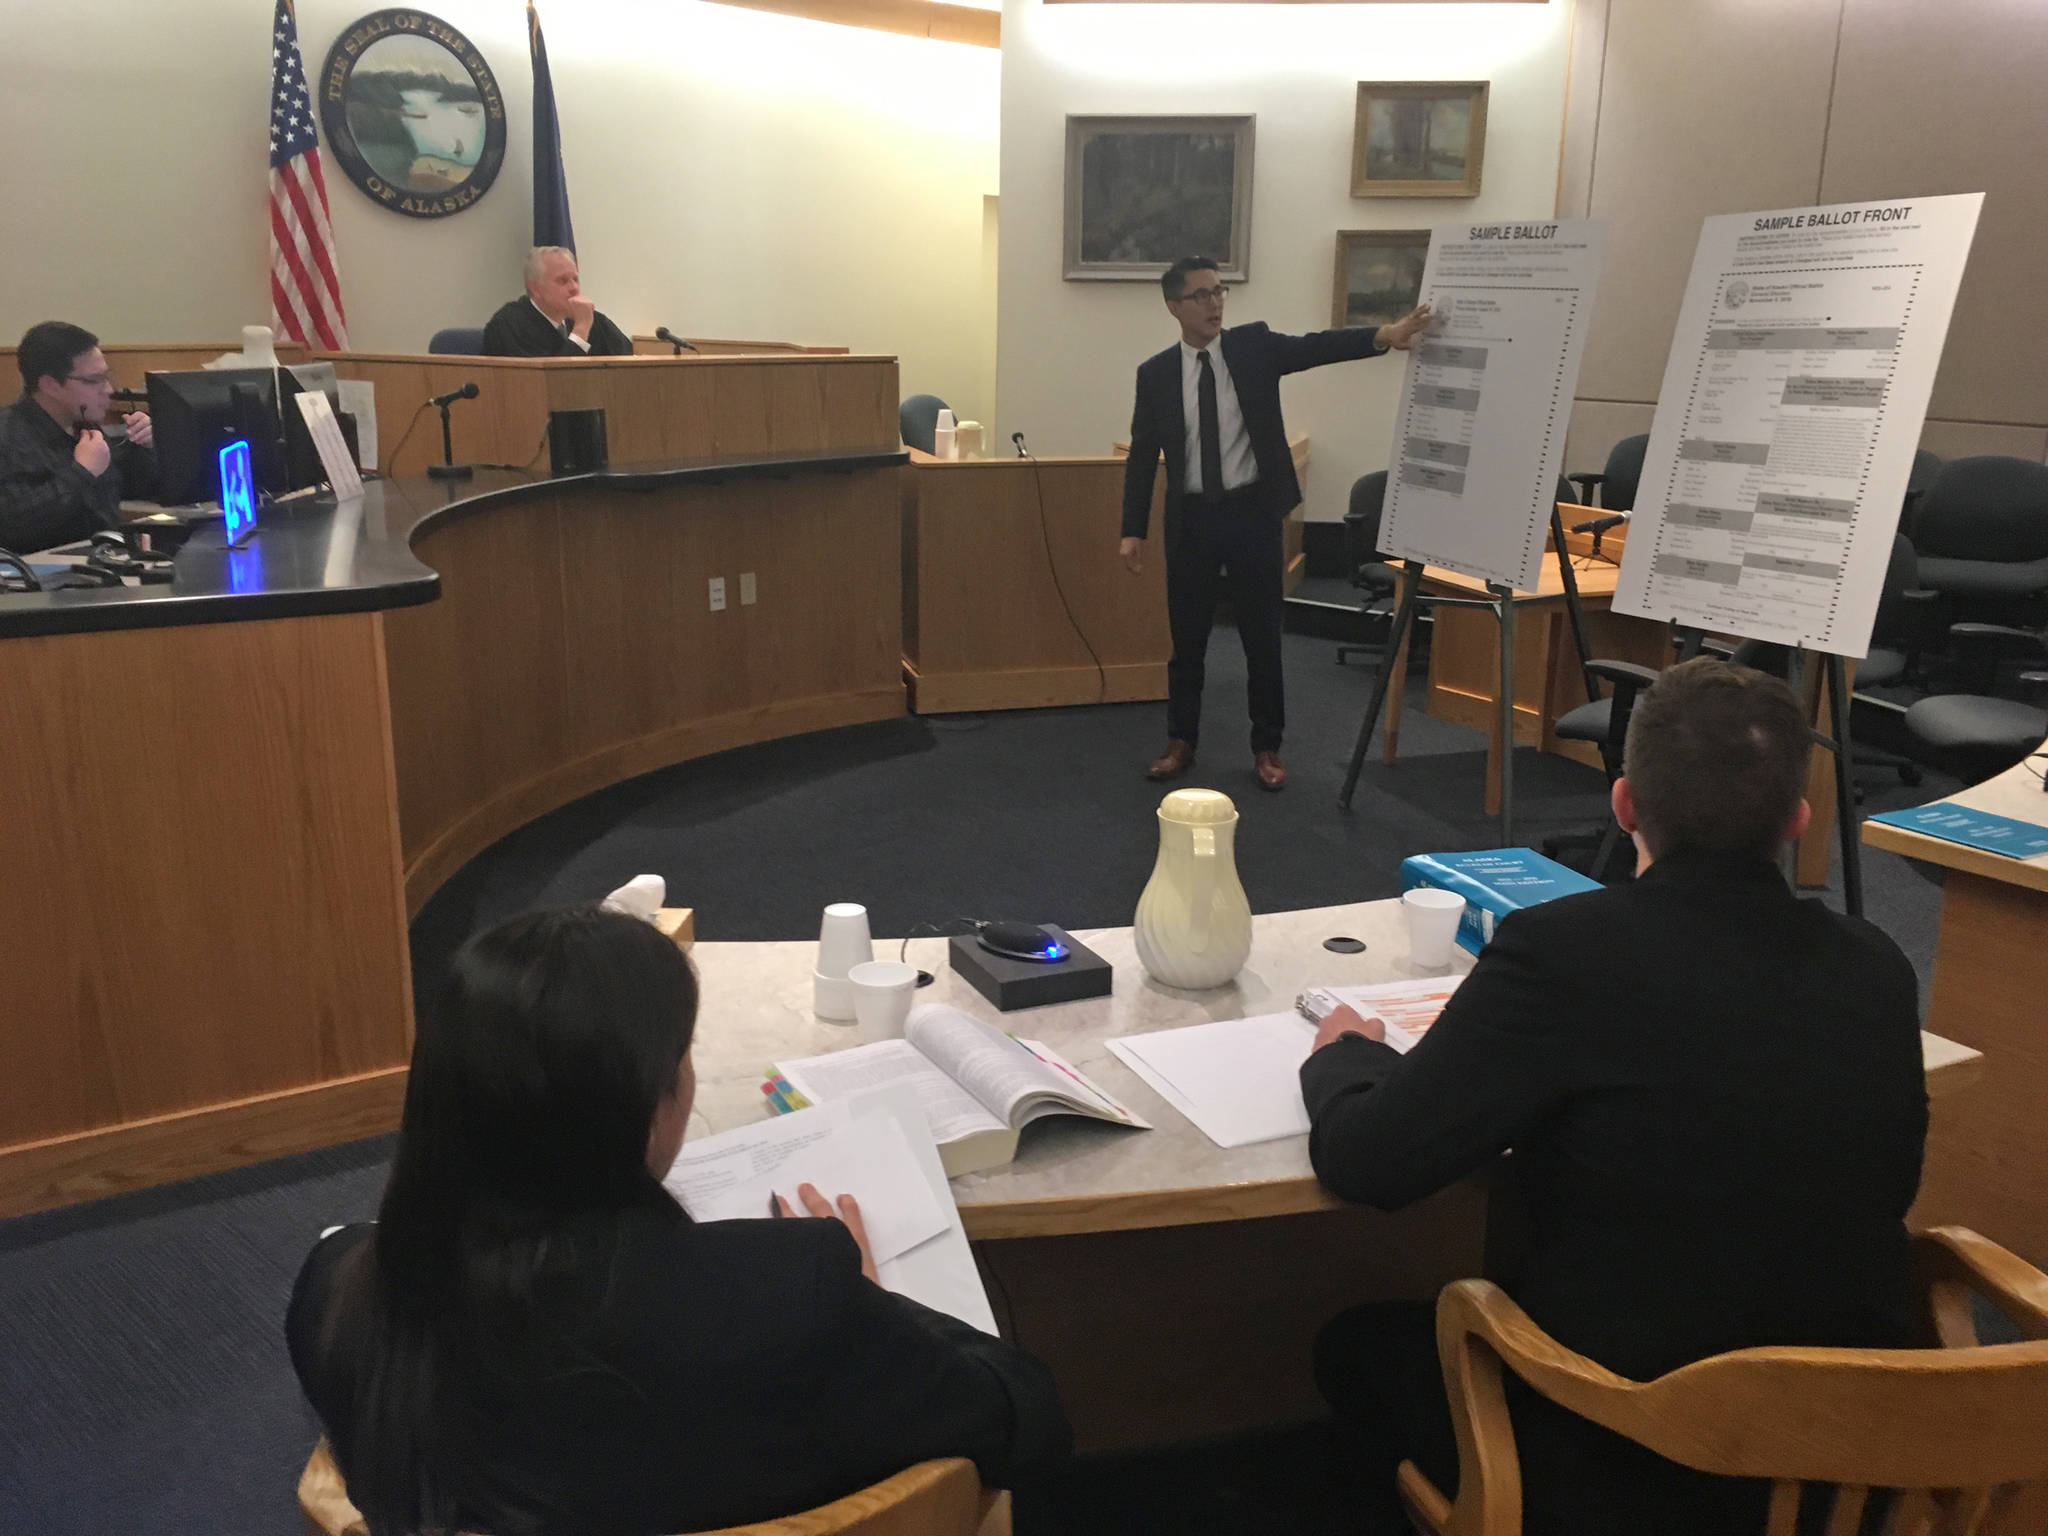 State attorneys Elizabeth Bakalar, foreground left, and Margaret Paton-Walsh, foreground right, listen to arguments made by attorney Jon Choate on Thursday, Sept. 21, 2017 in Alaska Superior Court in Juneau. At background left is Judge Philip Pallenberg, who is expected to decide the Alaska Democratic Party’s lawsuit against the state next week. (James Brooks | Juneau Empire File)